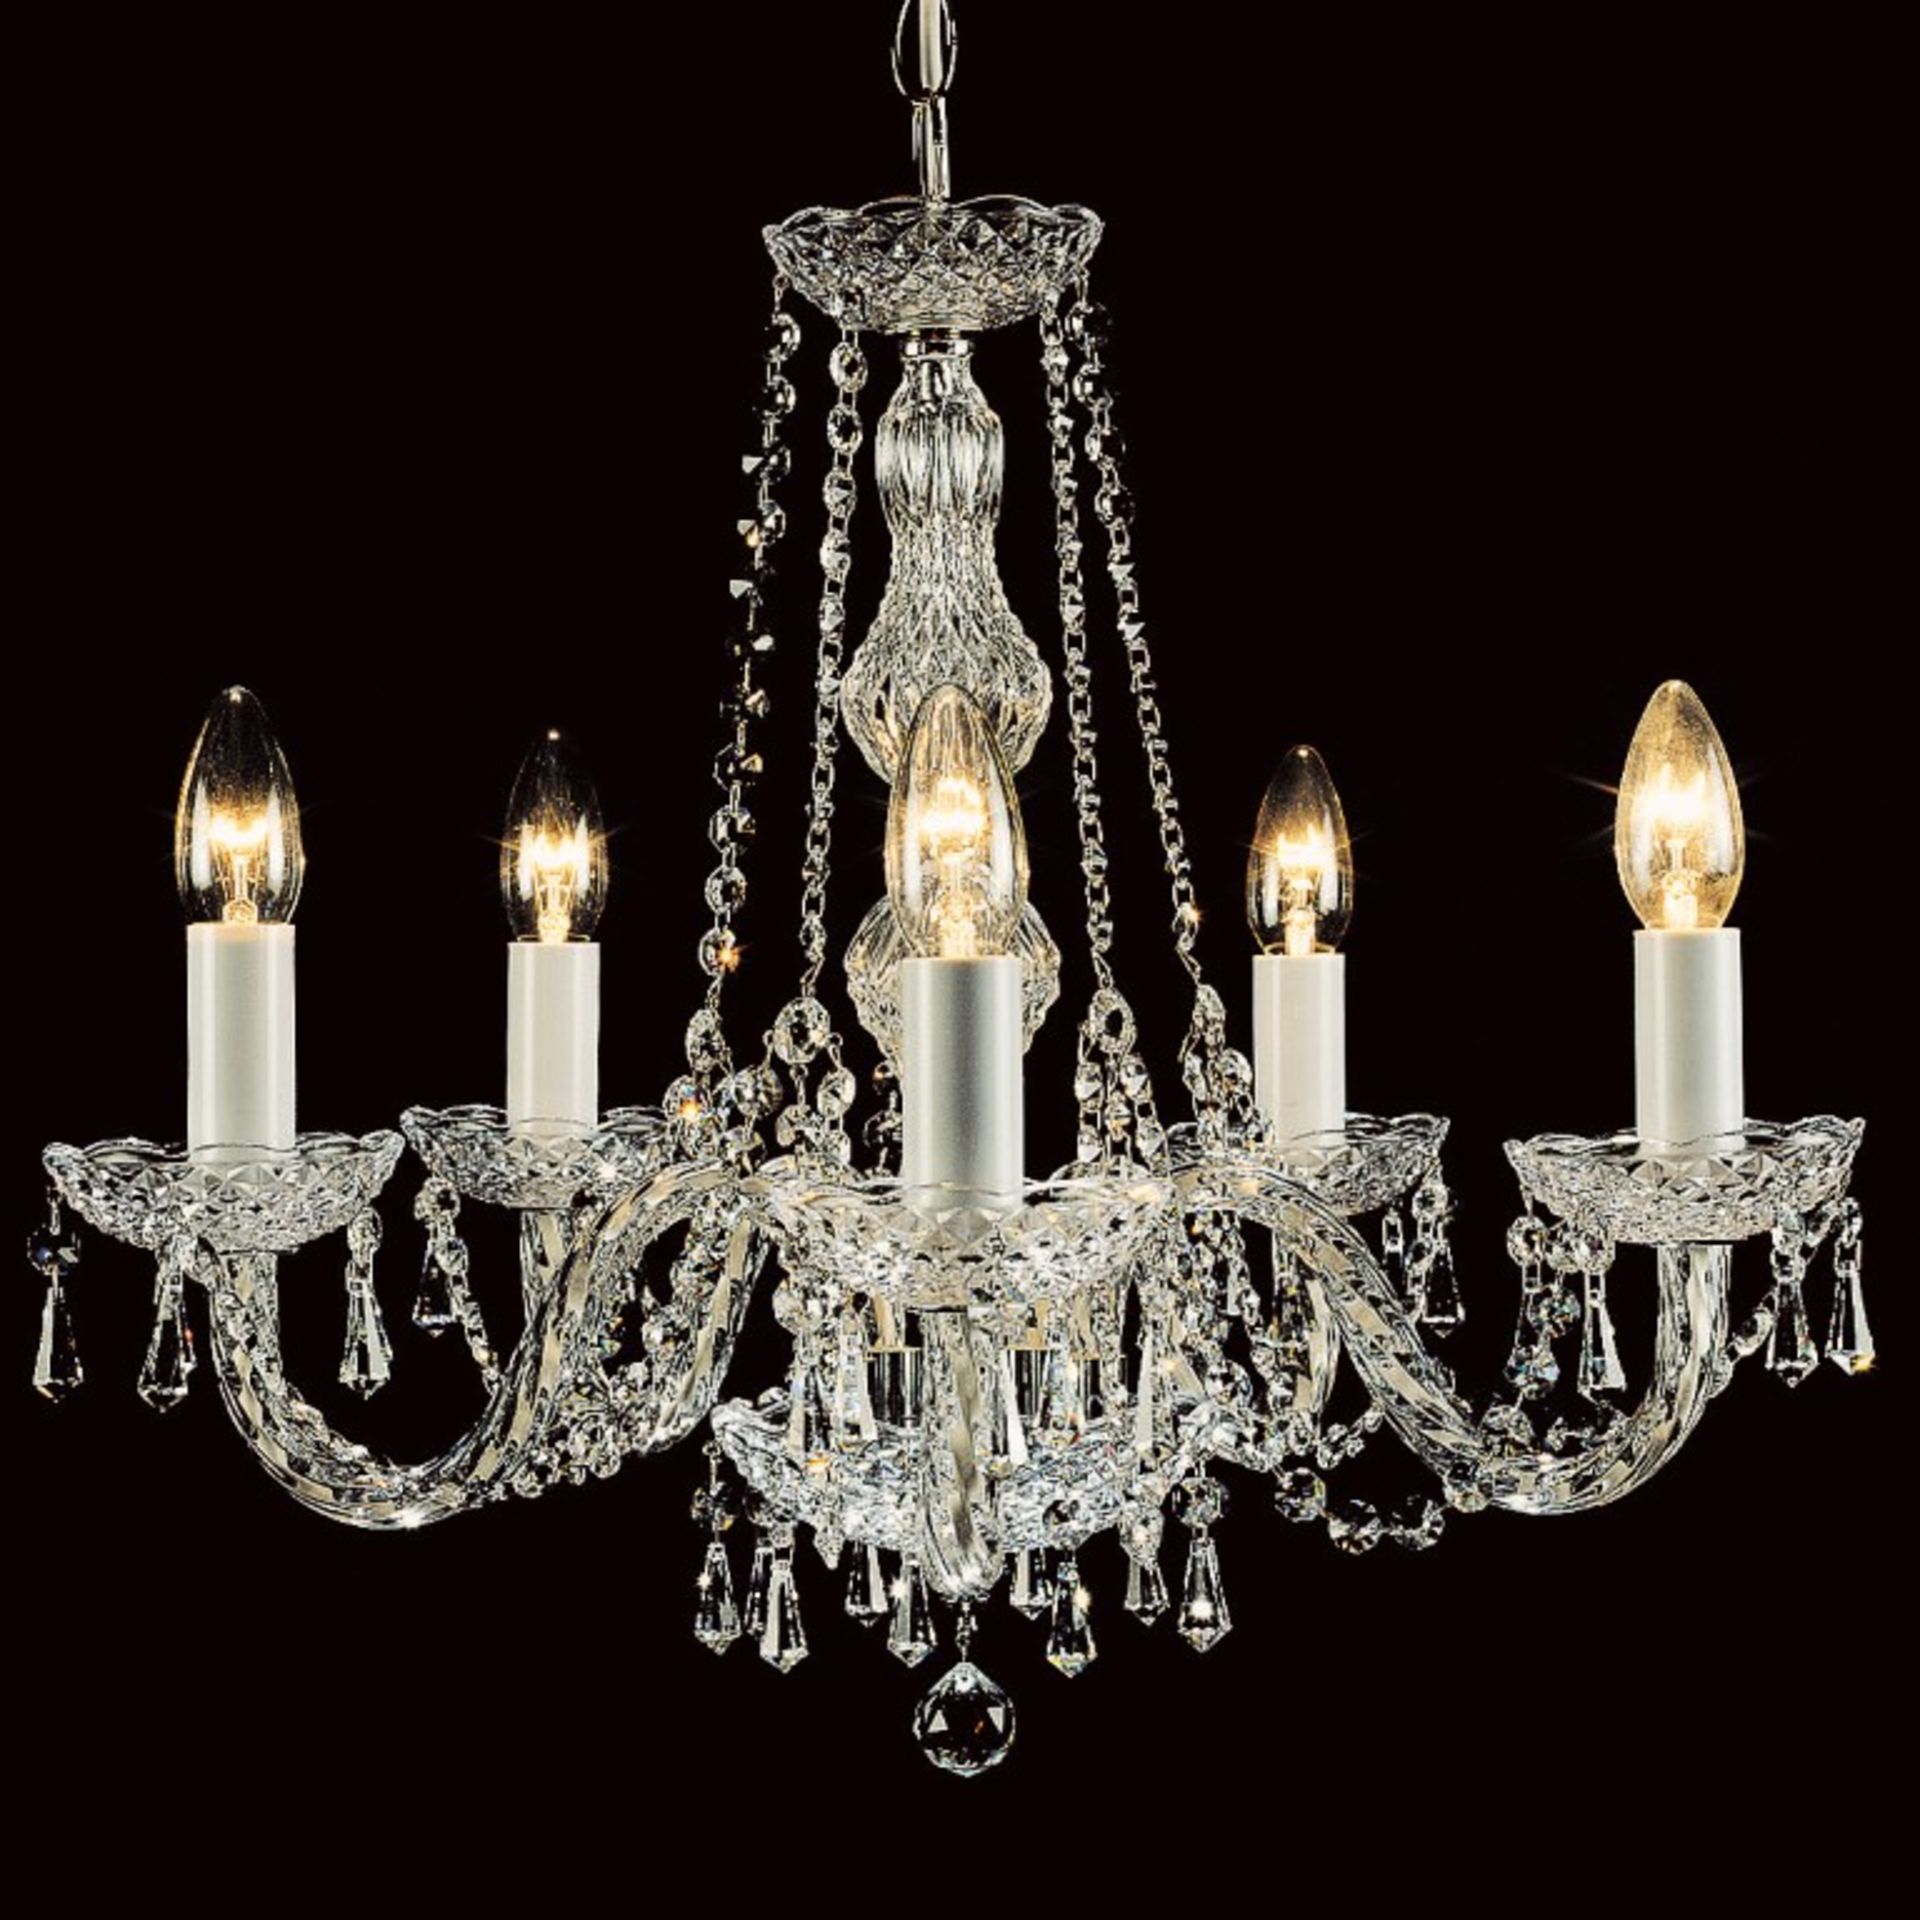 1 x Impex "Modra" 5-Light Georgian-Style Crystal Chandelier Fitting with Strass Crystal - Ref: